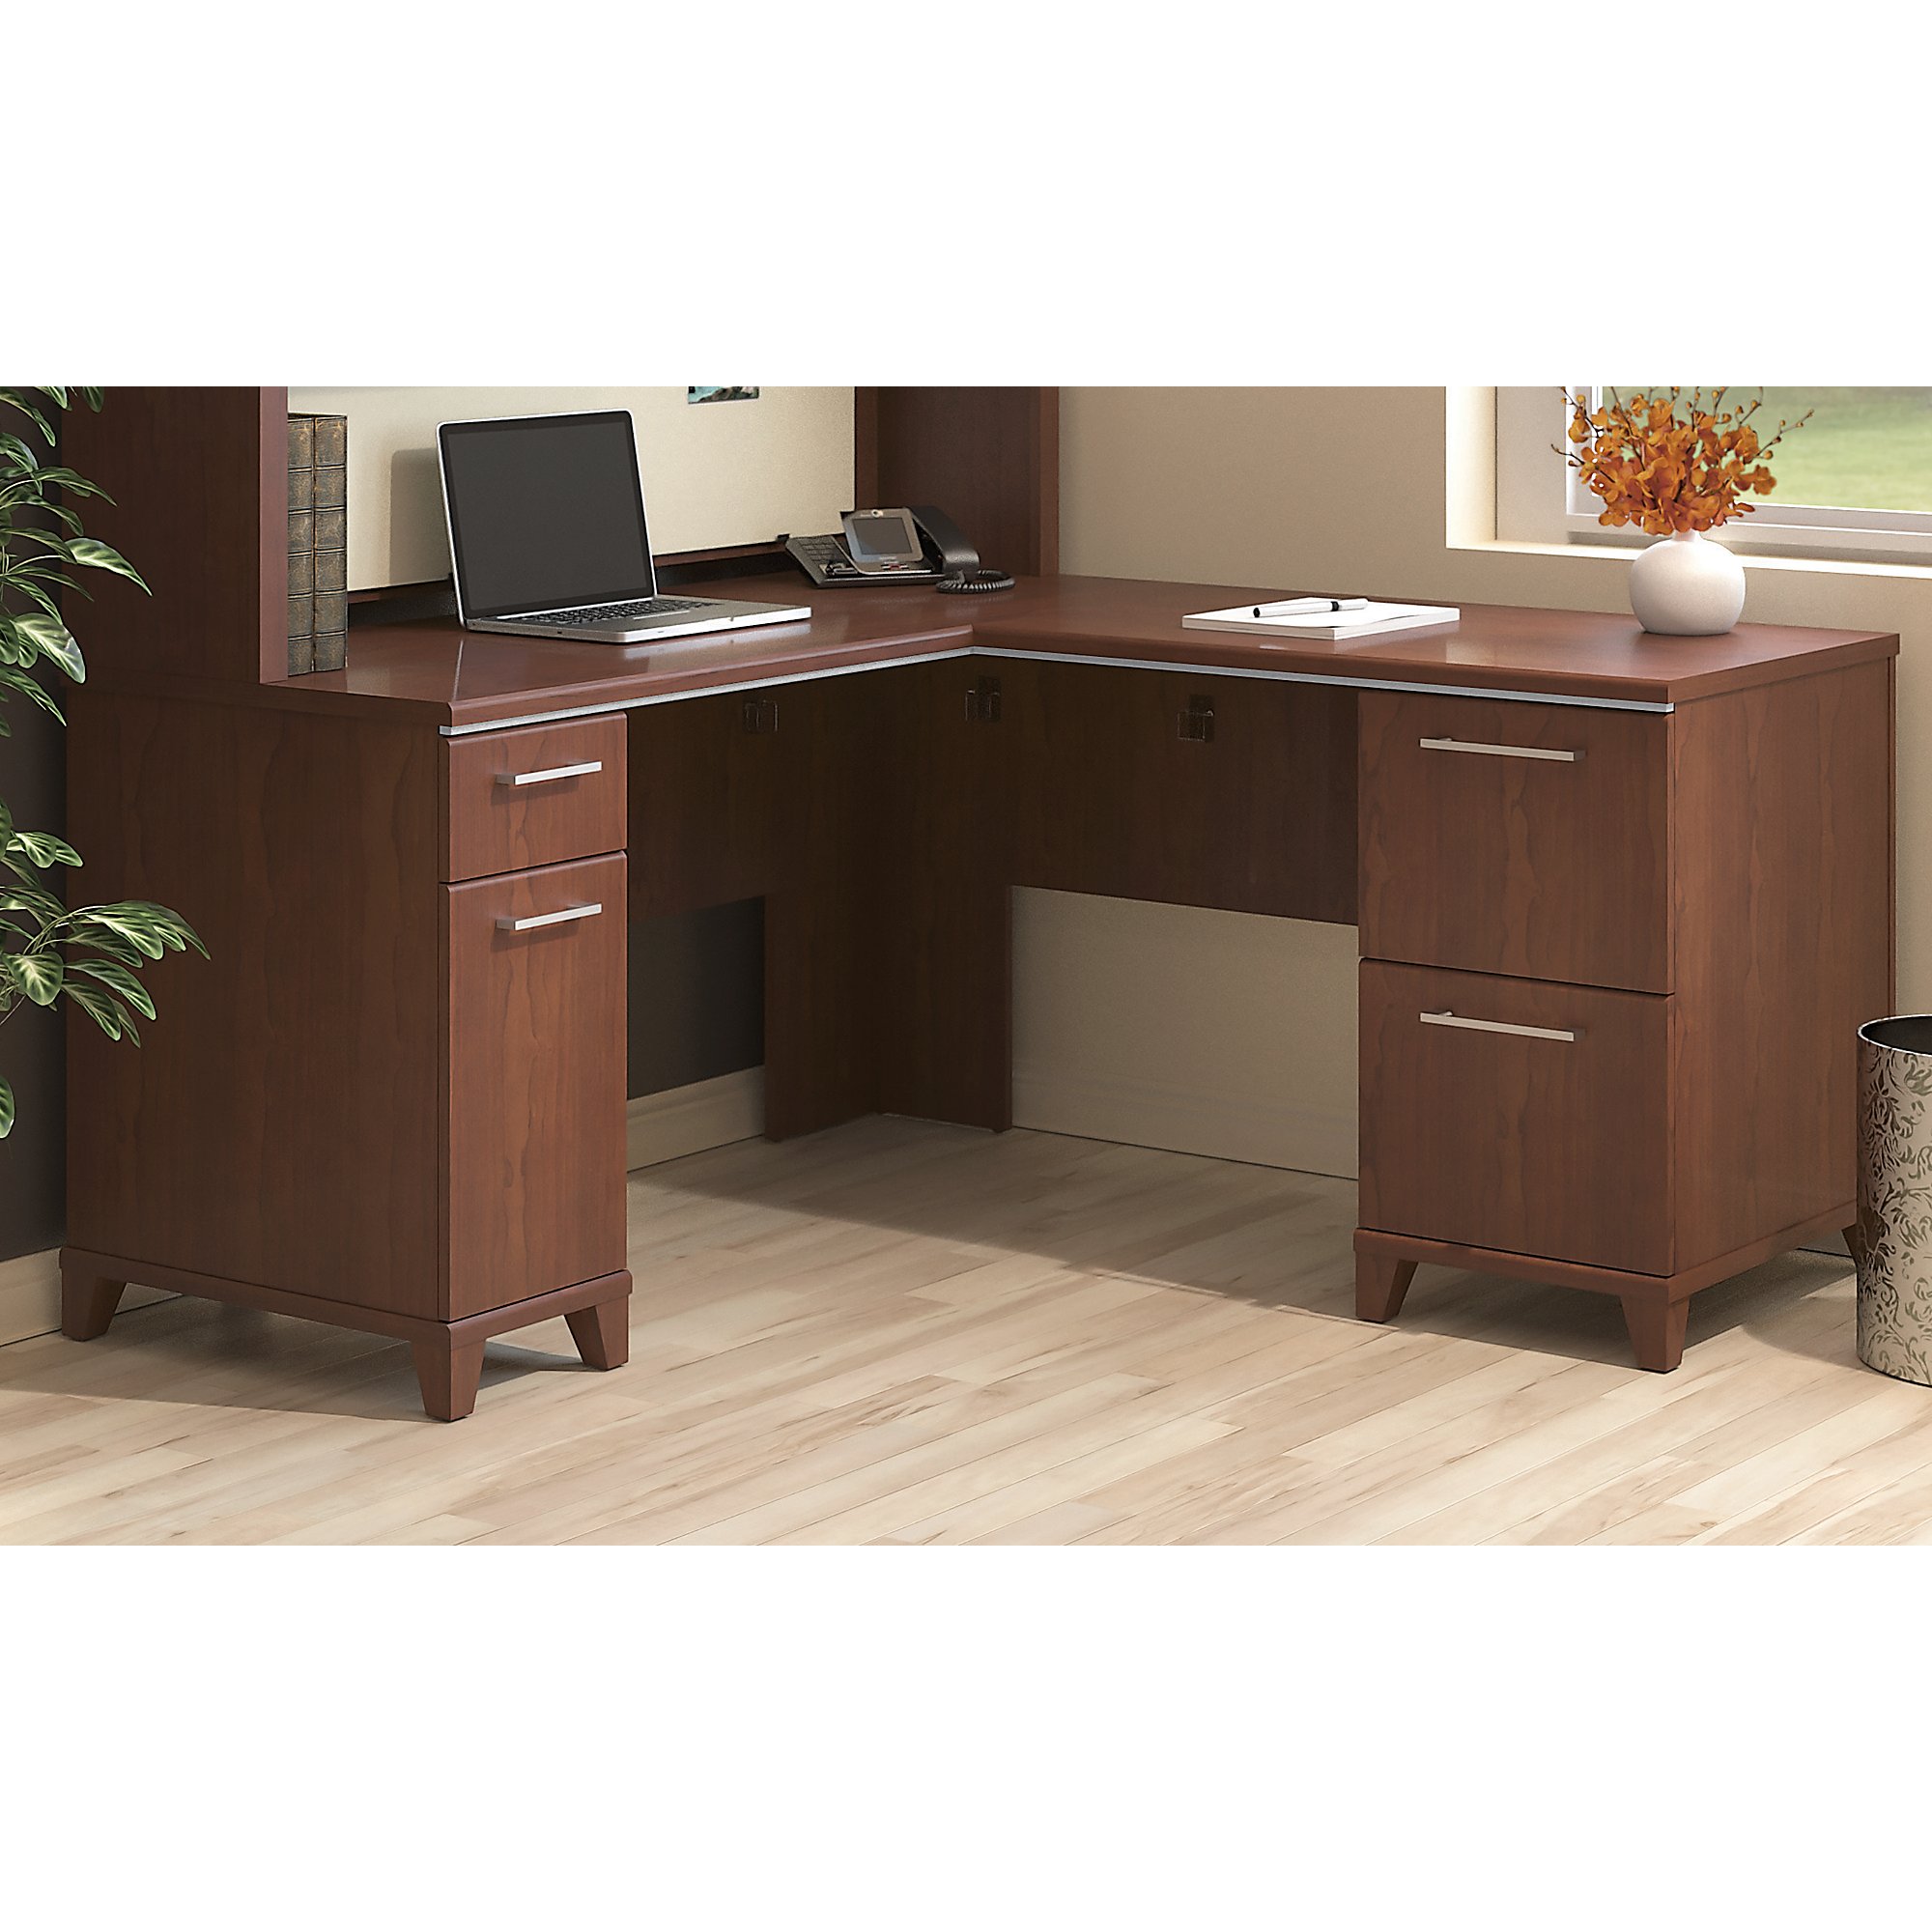 Home office furniture l shaped desk with drawers environmental 1